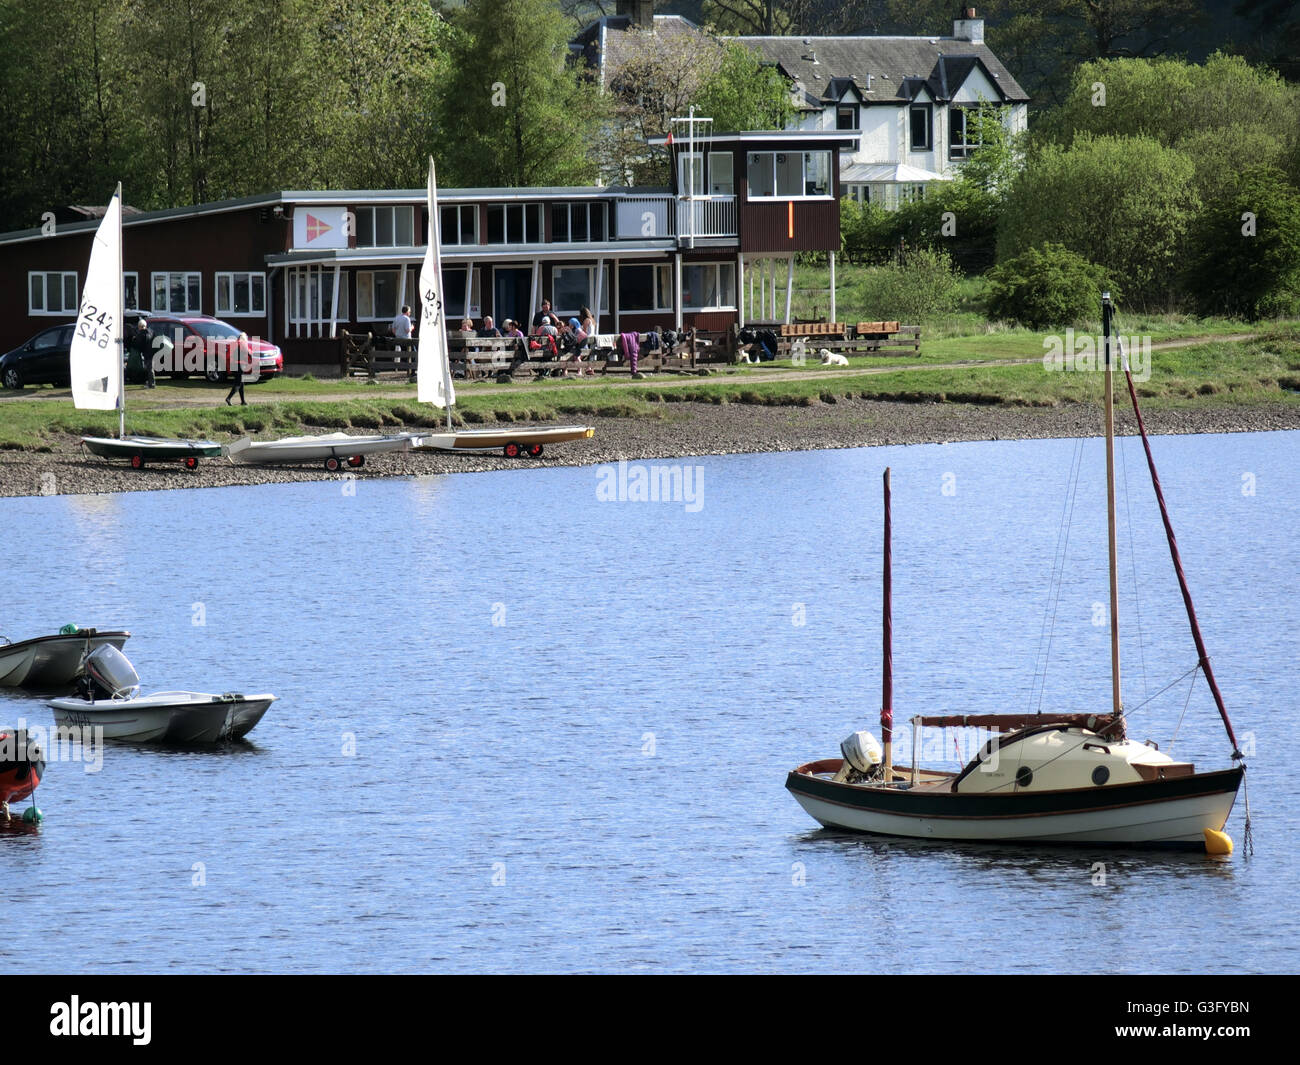 Boats Moored on St Marys Loch with Boat Clubhouse & Tibbie Shiels Inn, Upper Yarrow Valley, Borders Scotland, UK Stock Photo